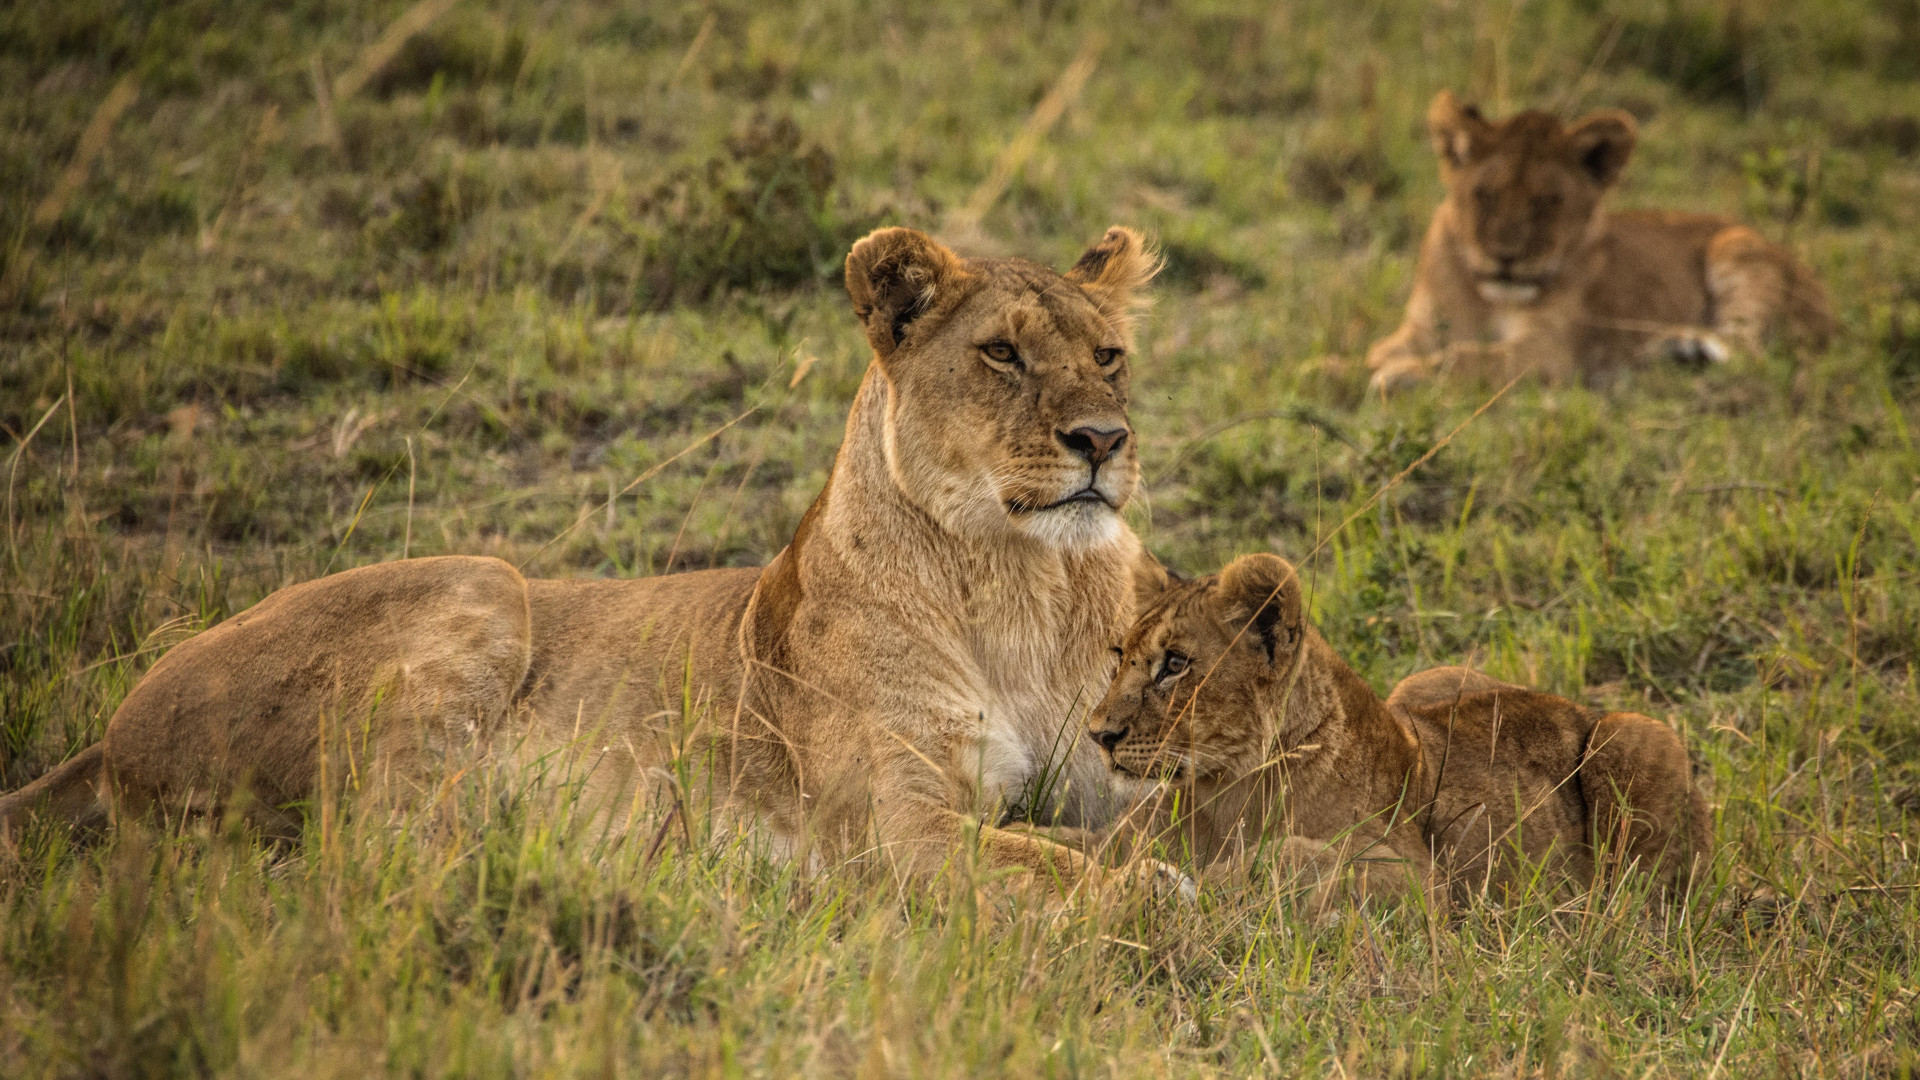 Lioness with cubs from Serengeti wallpaper 1920x1080